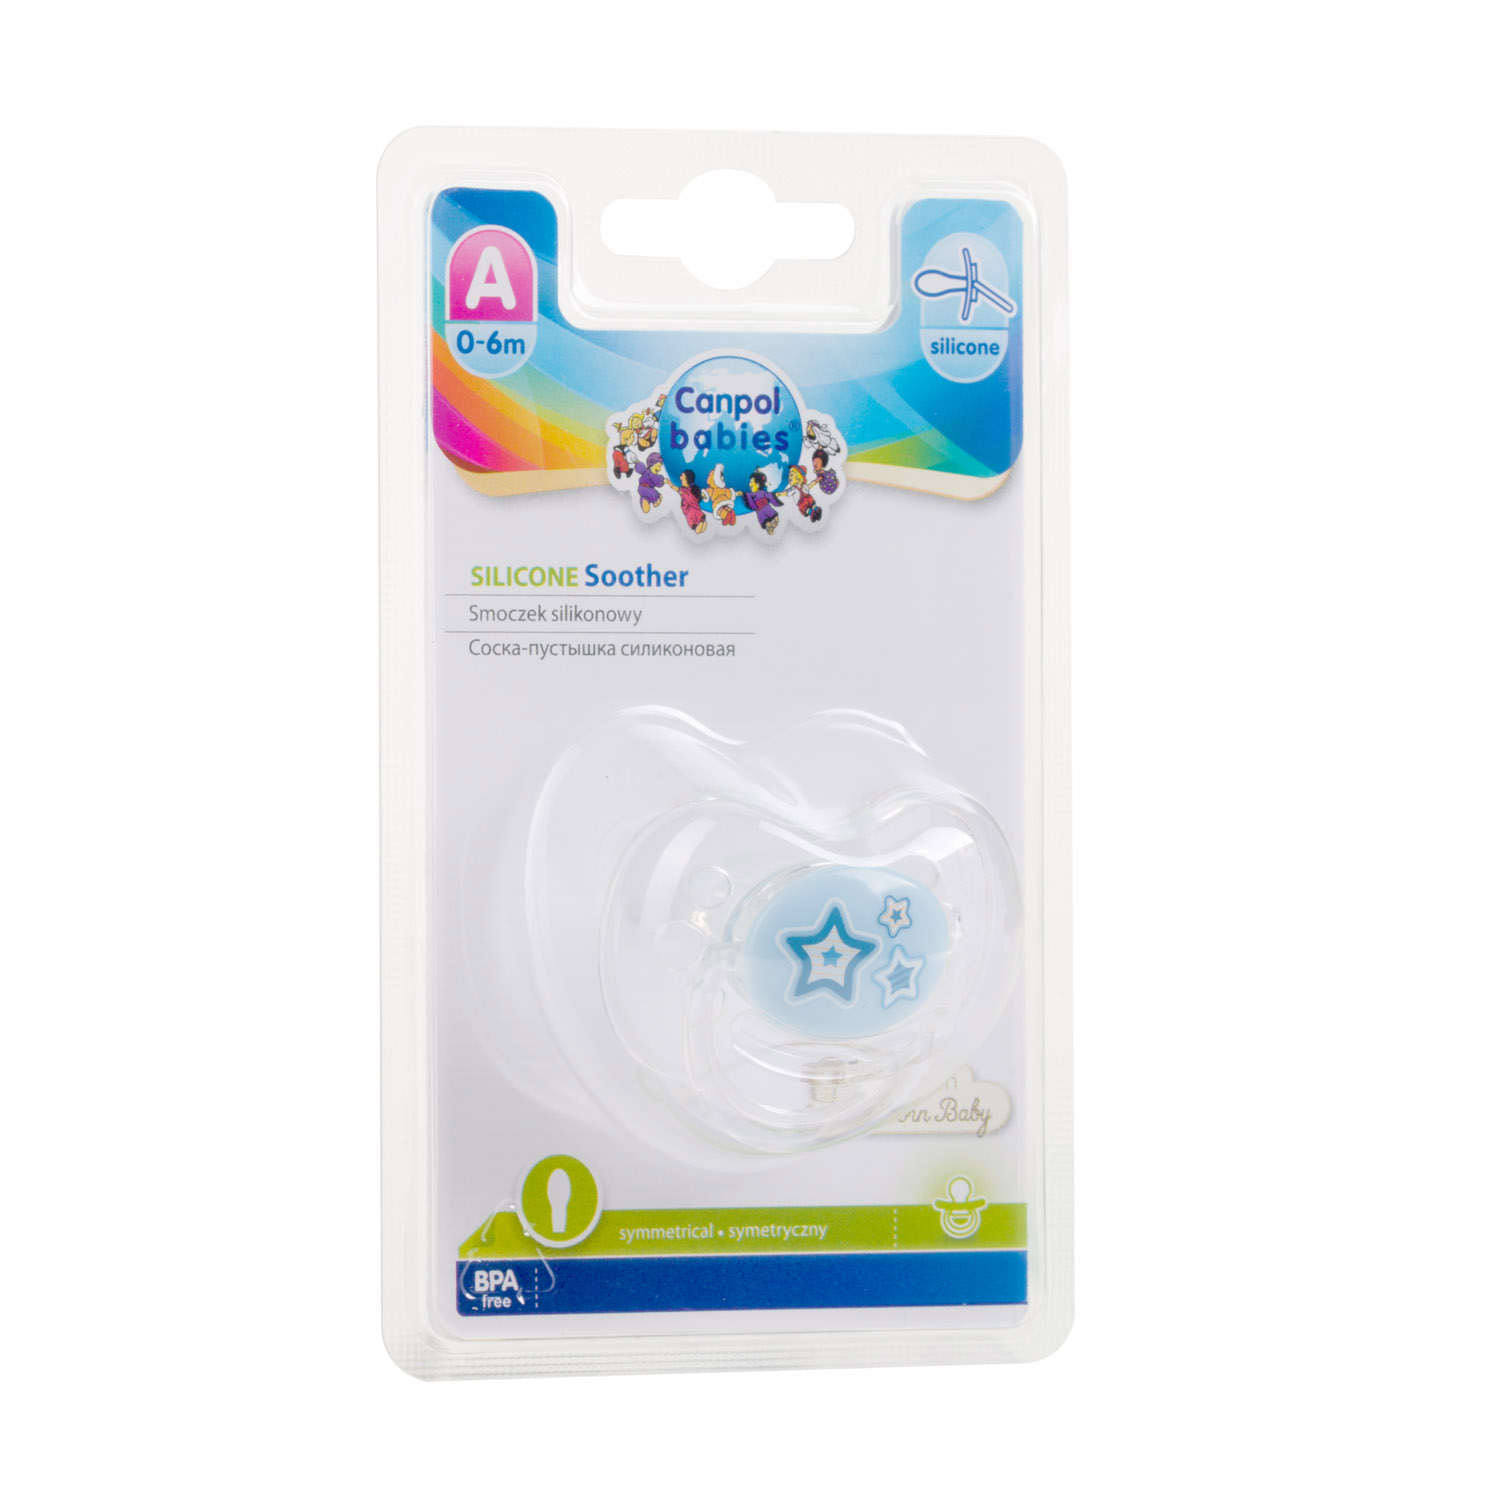 CANPOL BABIES SILICONE SOOTHER 22/580